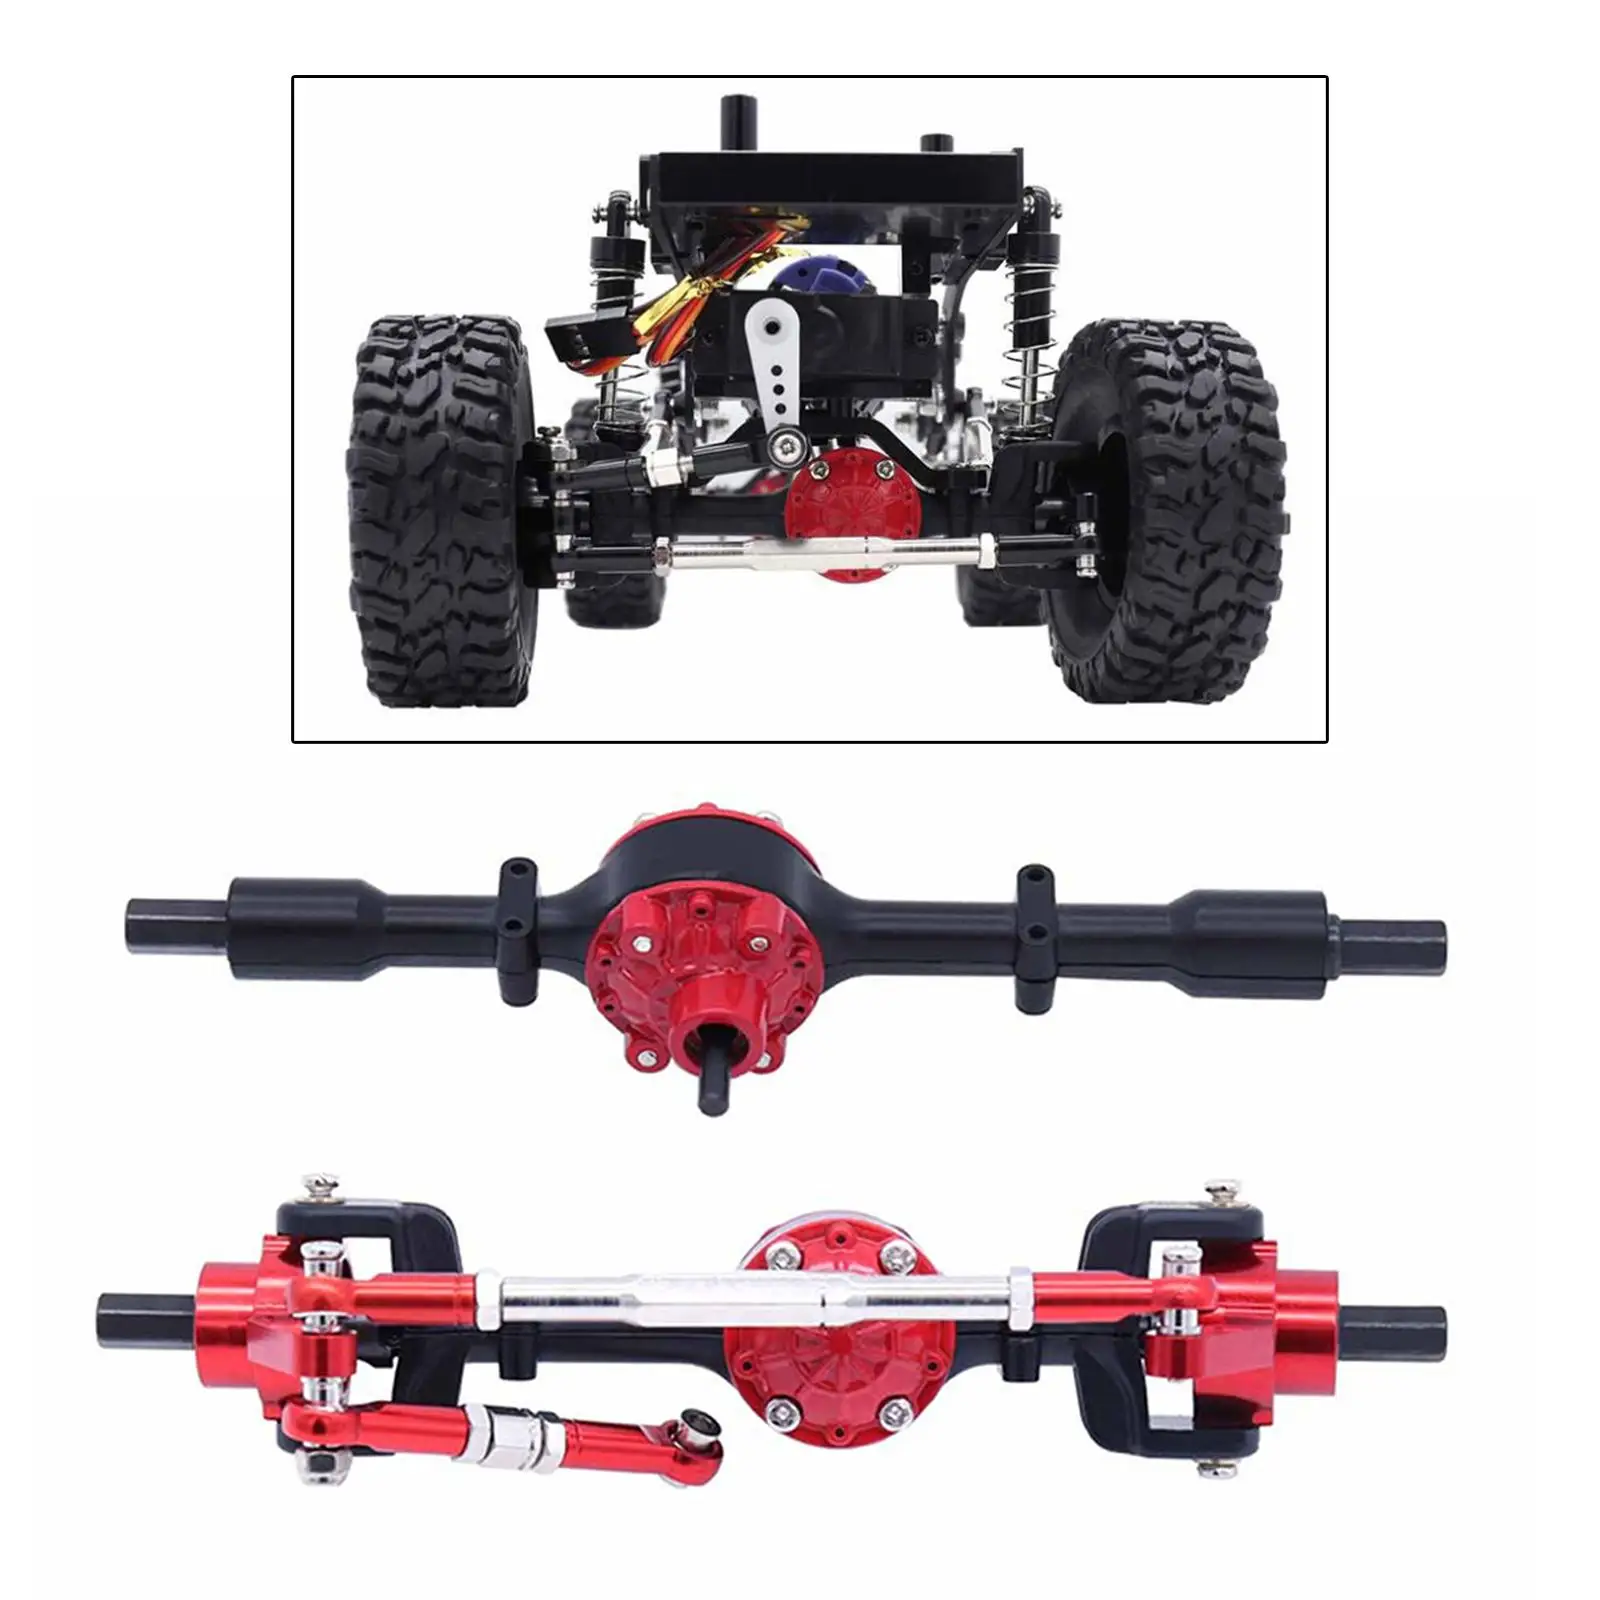 1:16 Scale RC Car Front and Rear Axle Set Convenient Durable Practical Upgrade Parts Accessory for B36 C24 B14 B24 RC